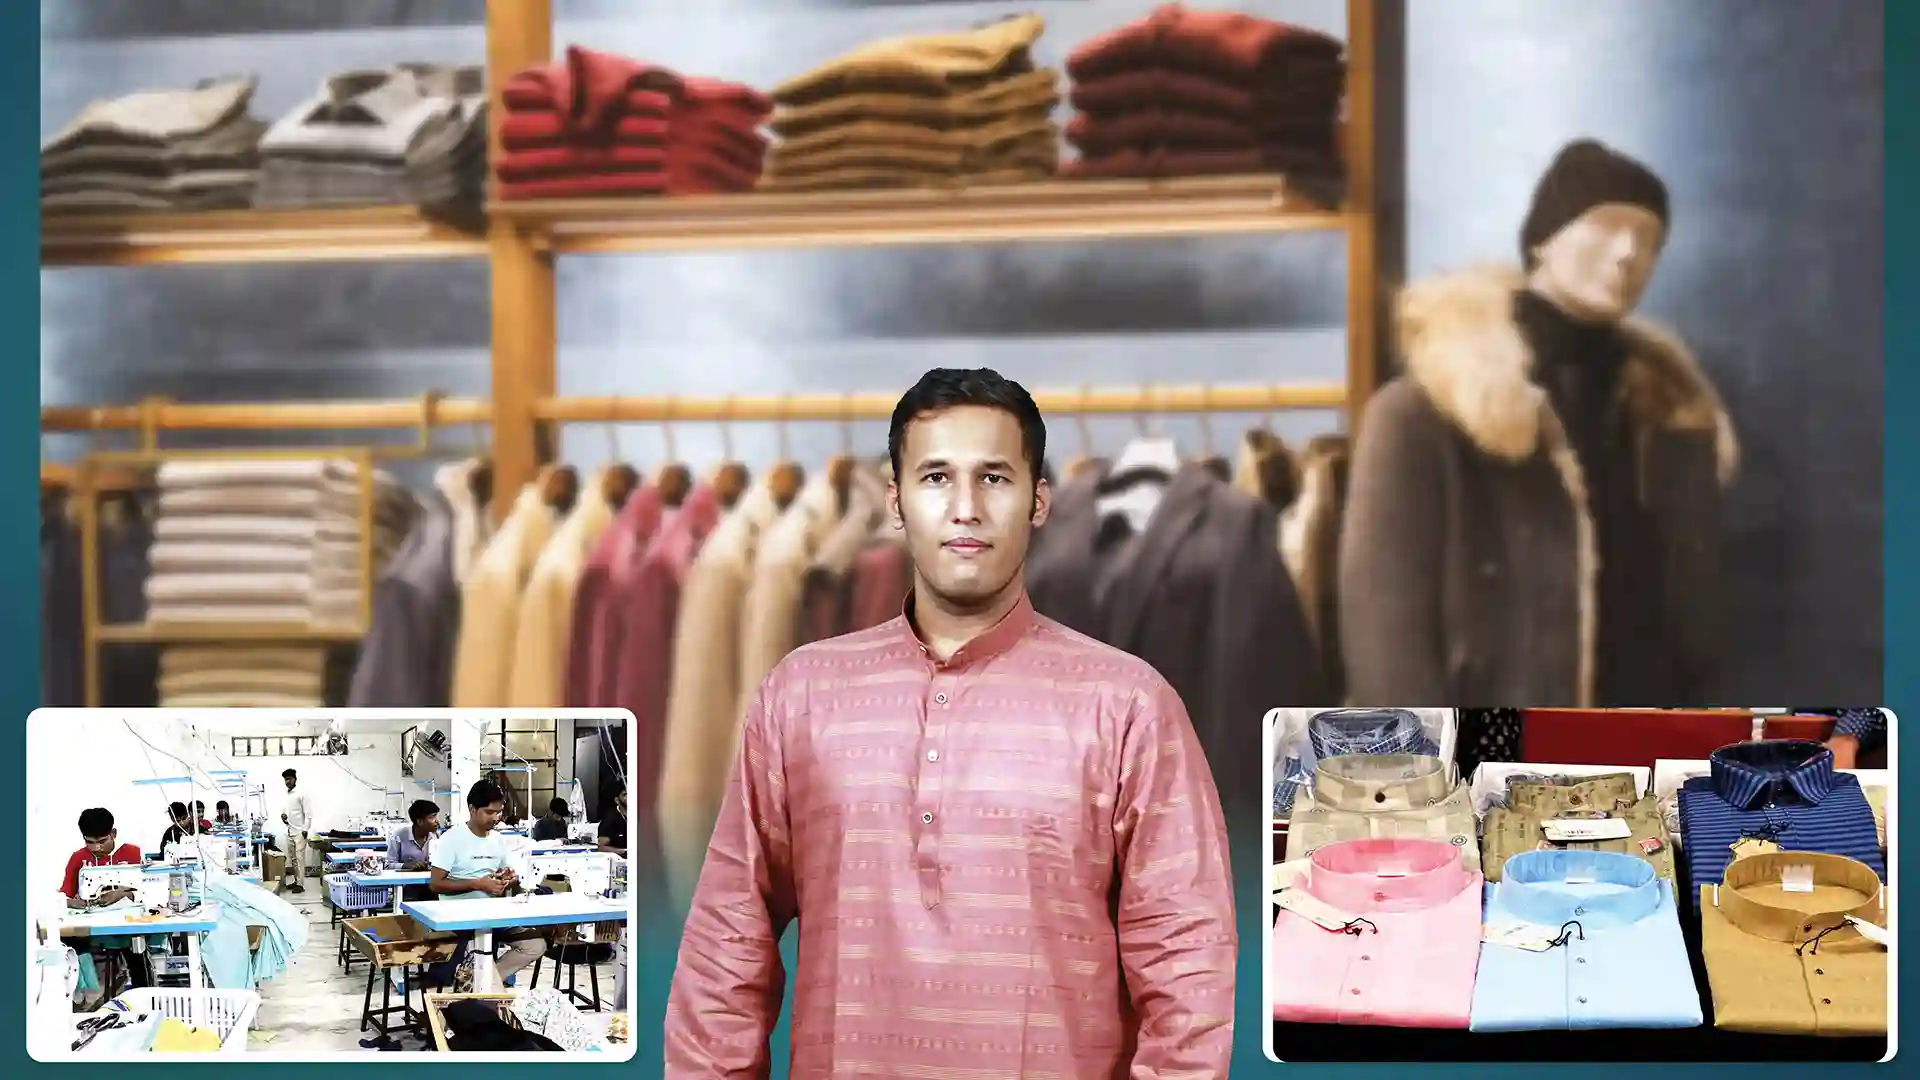 Course Trailer: Menswear Factory - Earn INR 1 Crore per Year. Watch to know more.